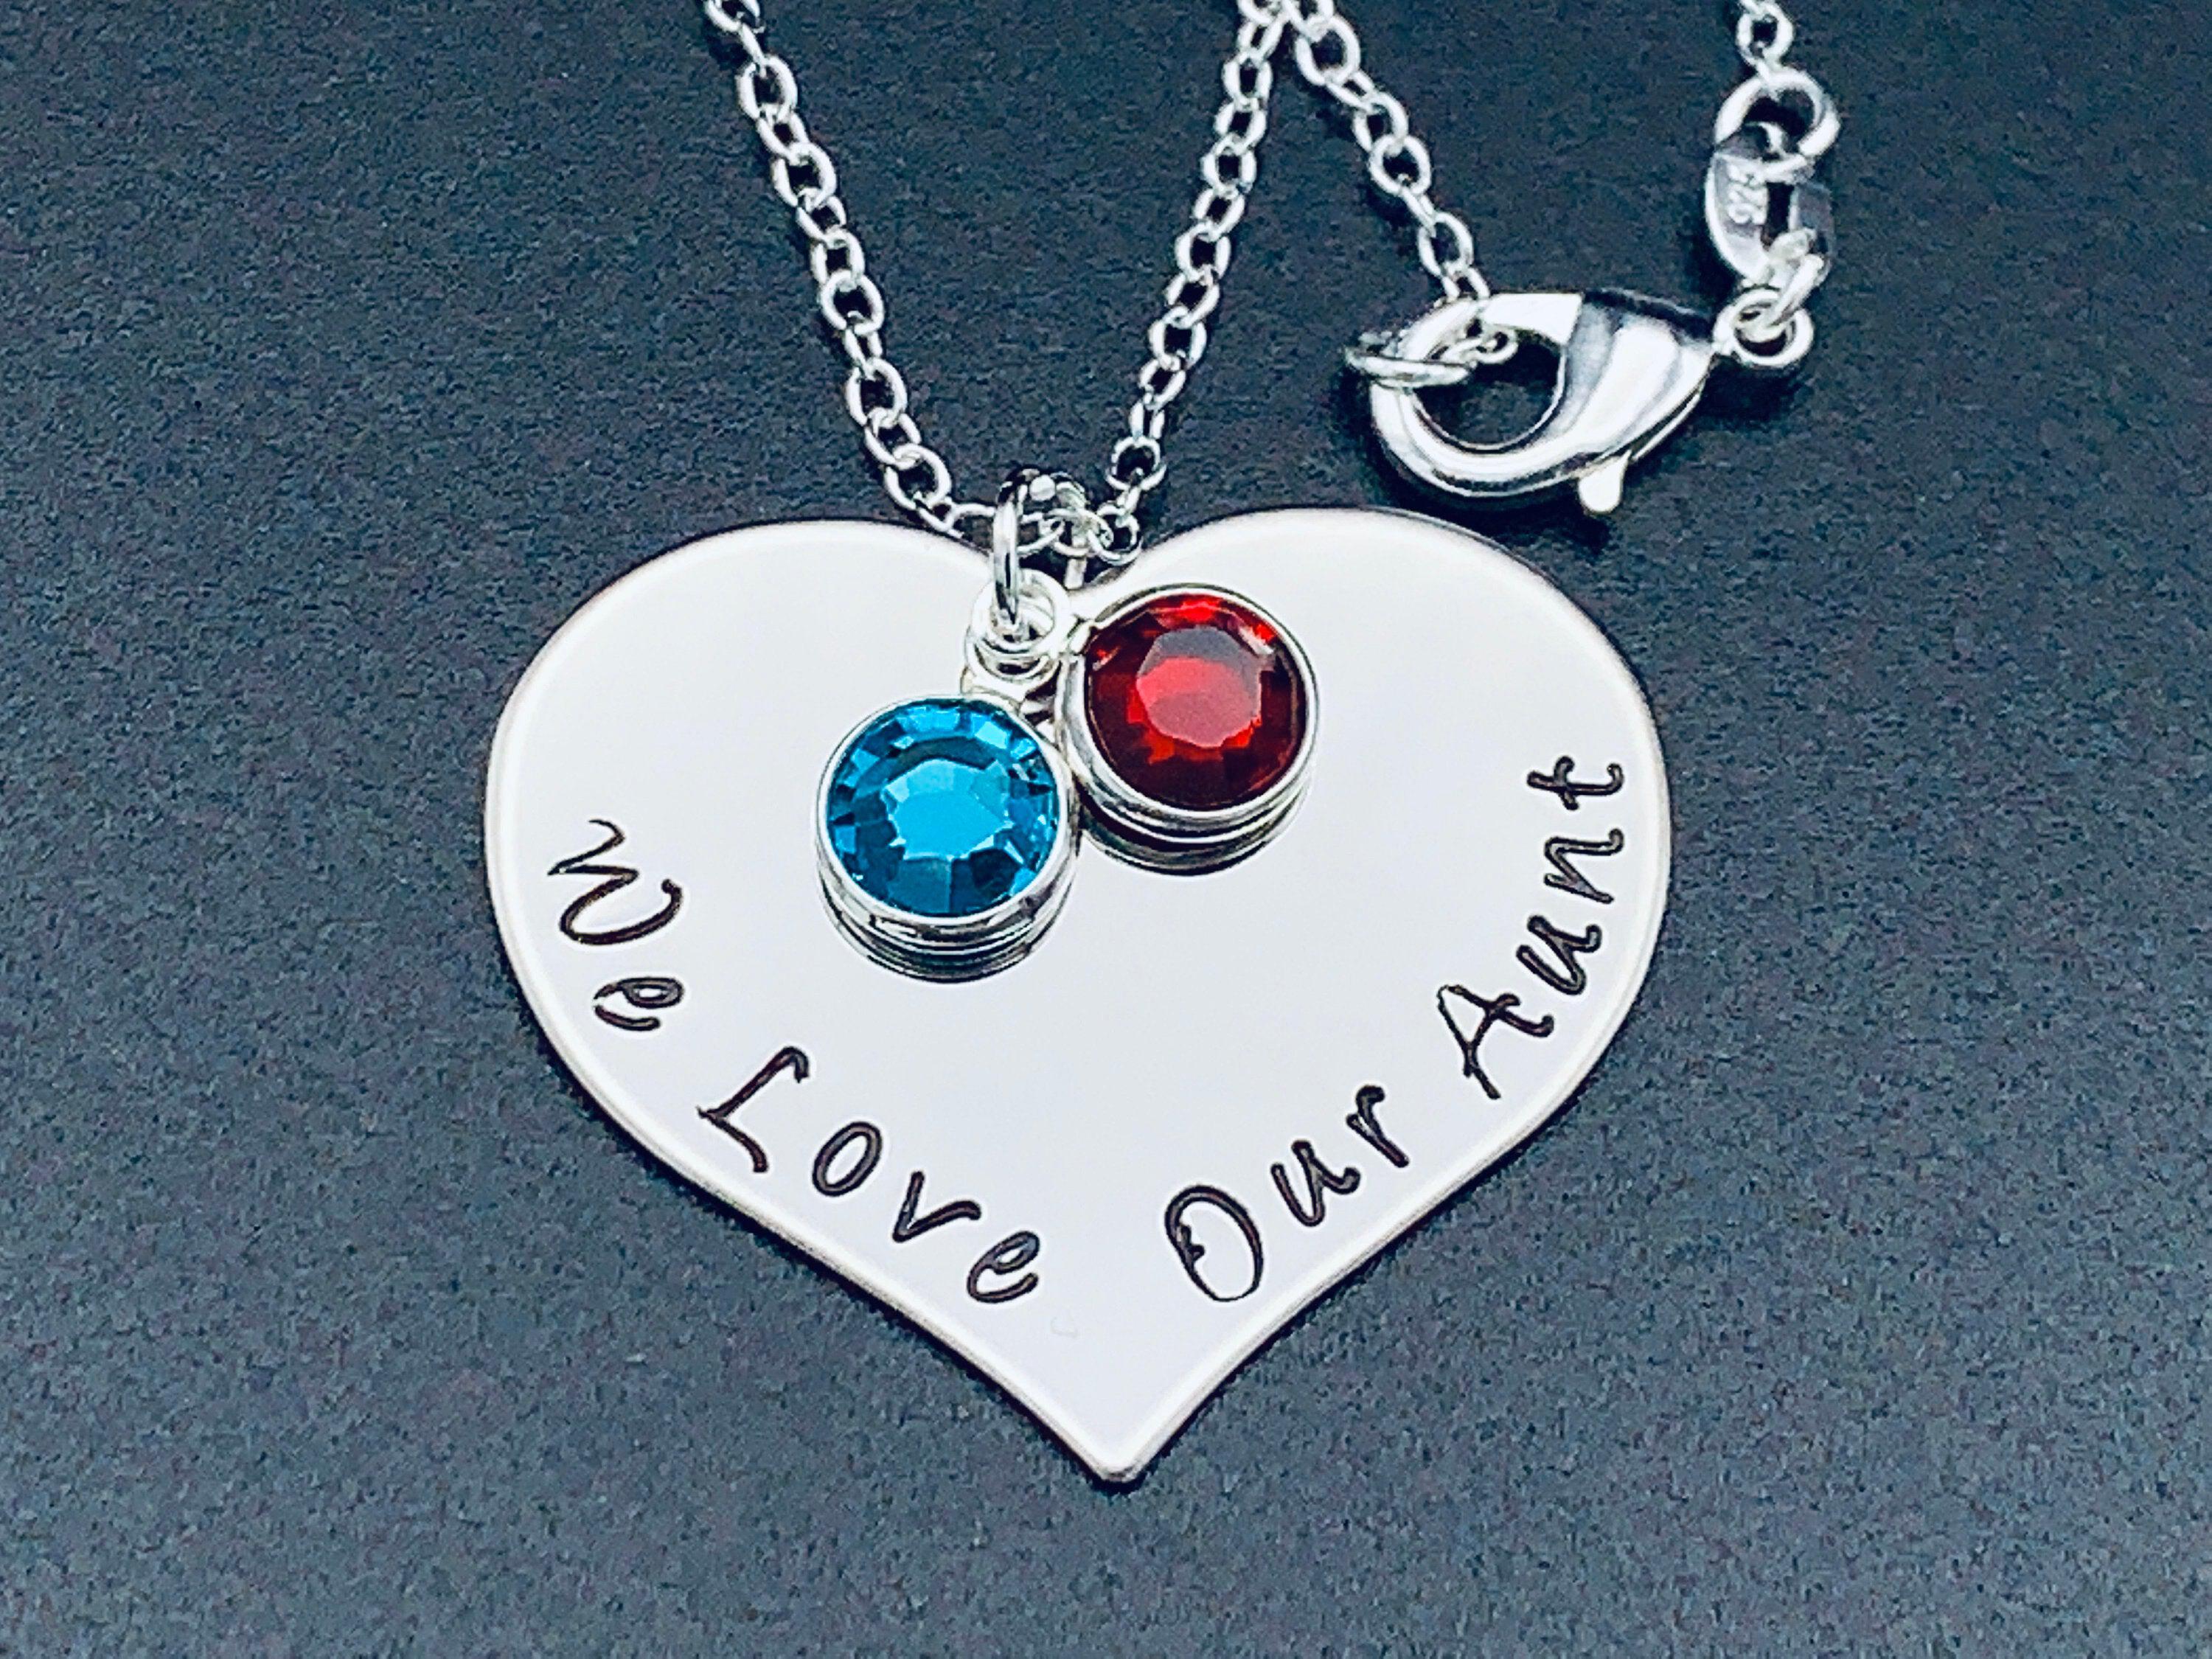 I Love You 3000 Times Stainless Steel Jewelry Neck Chain Necklace Couple  Gifts | eBay